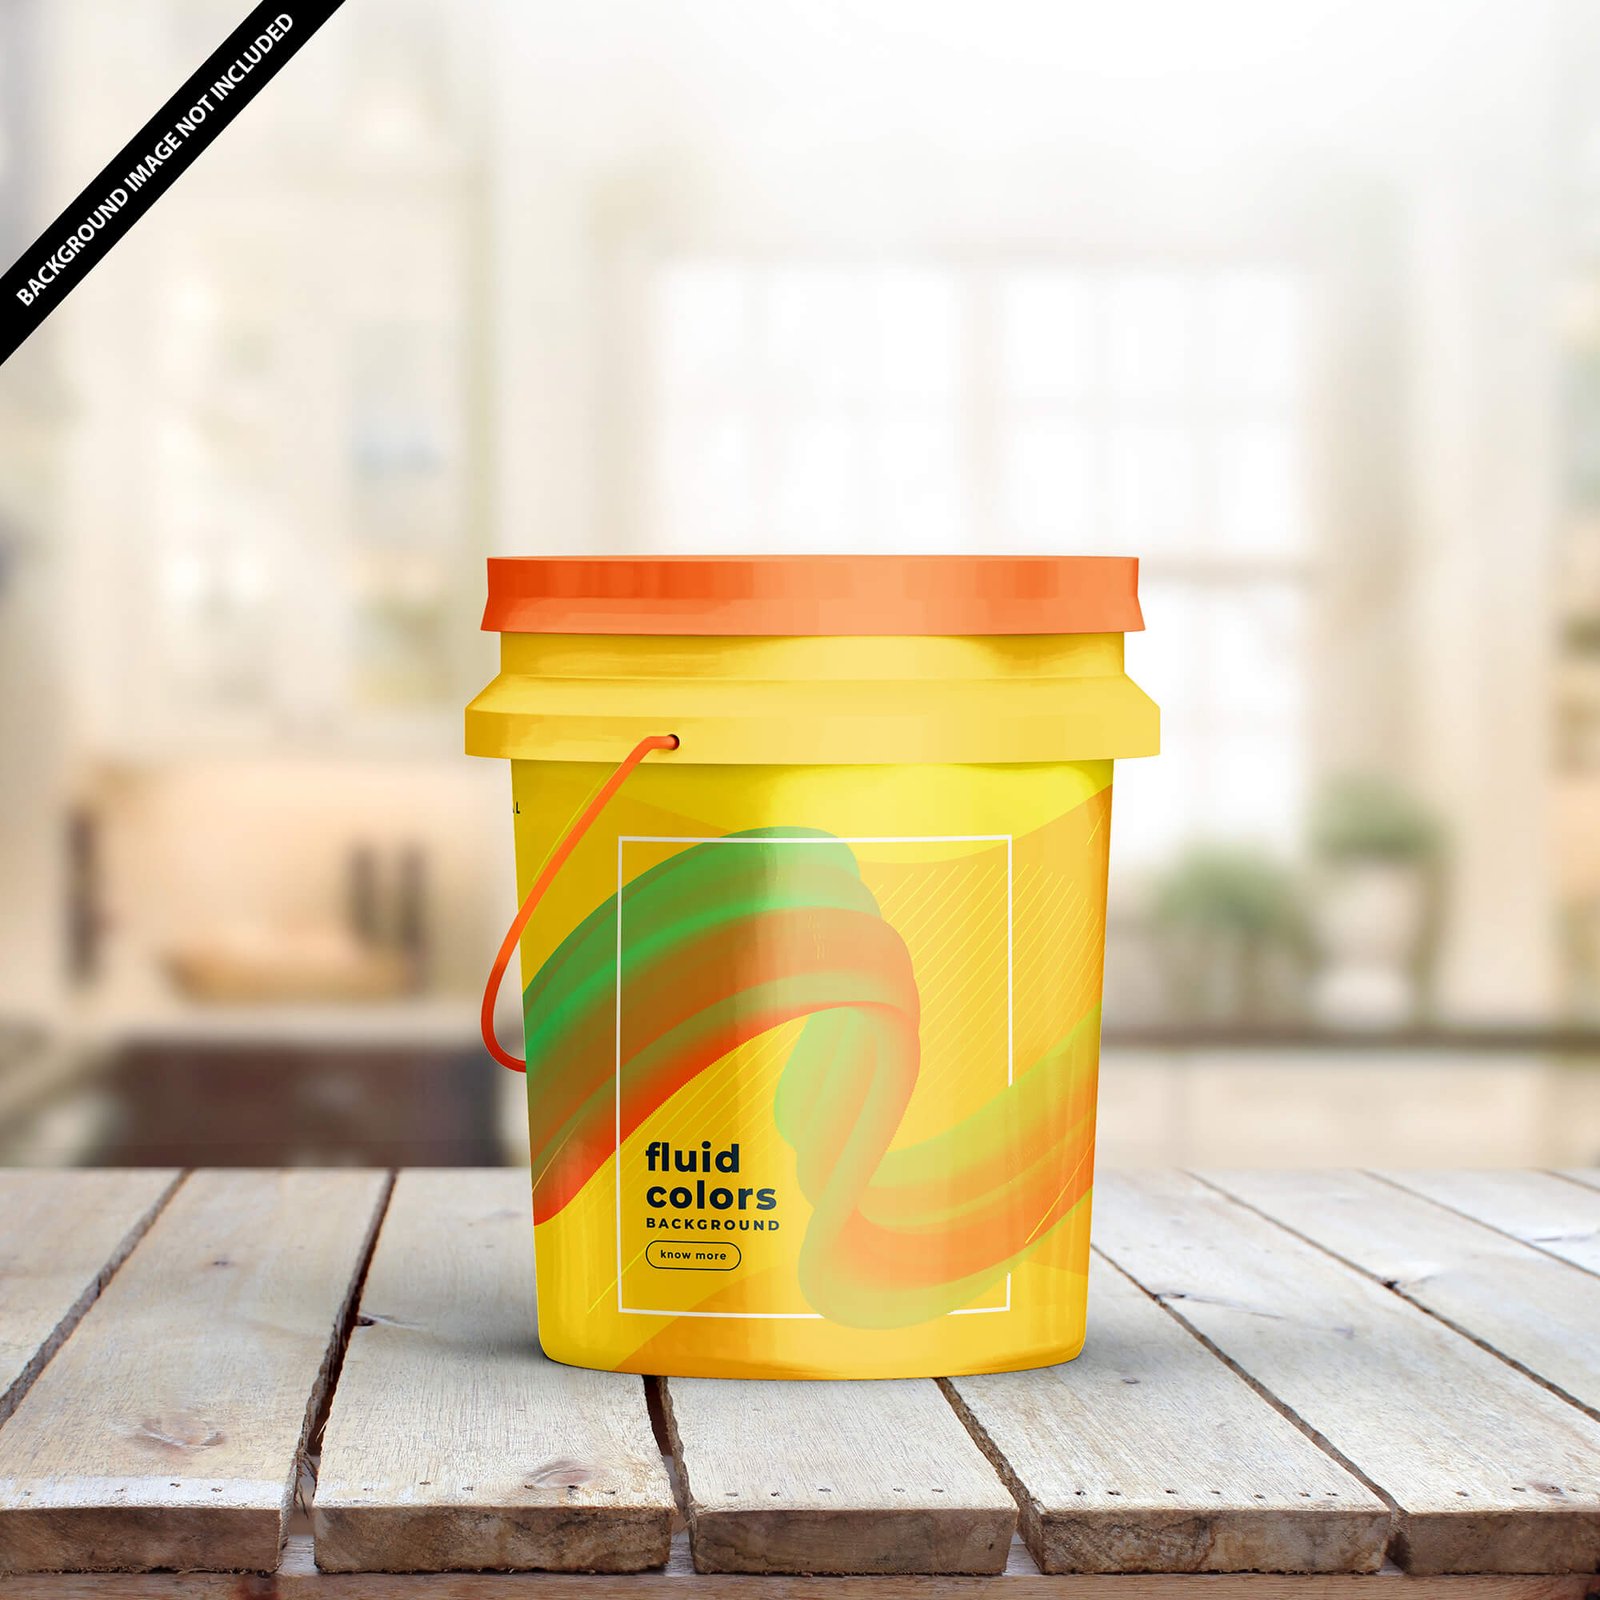 Free Color Paint Bucket Mockup PSD Template